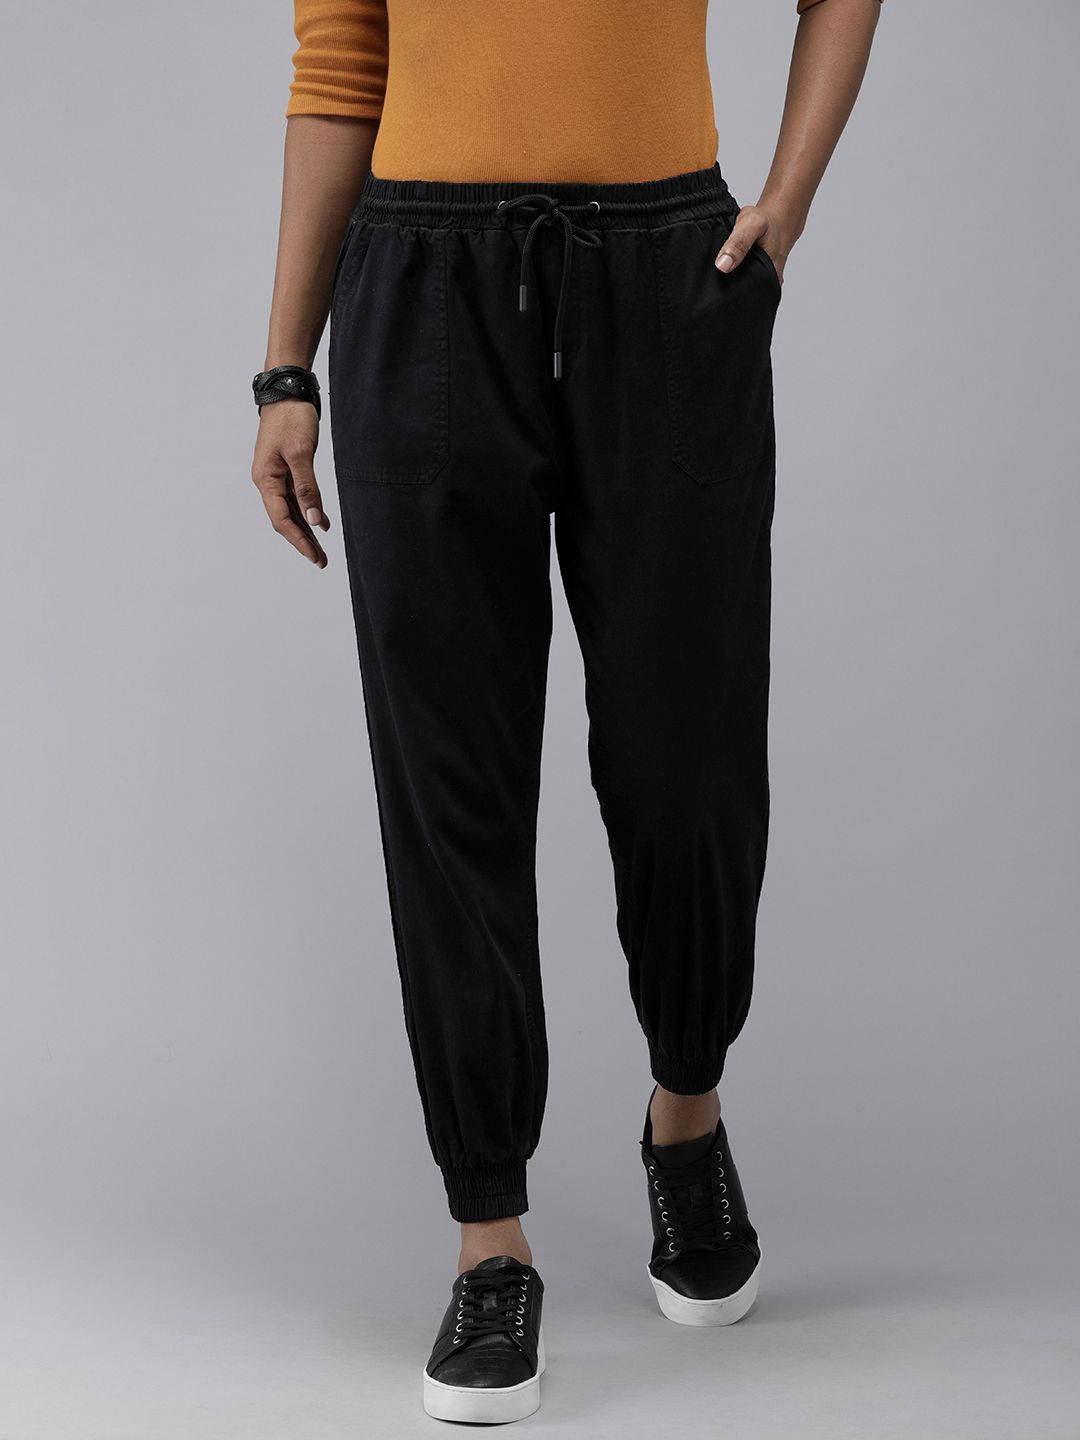 Roadster Women Black Solid Jogger Trousers Price in India